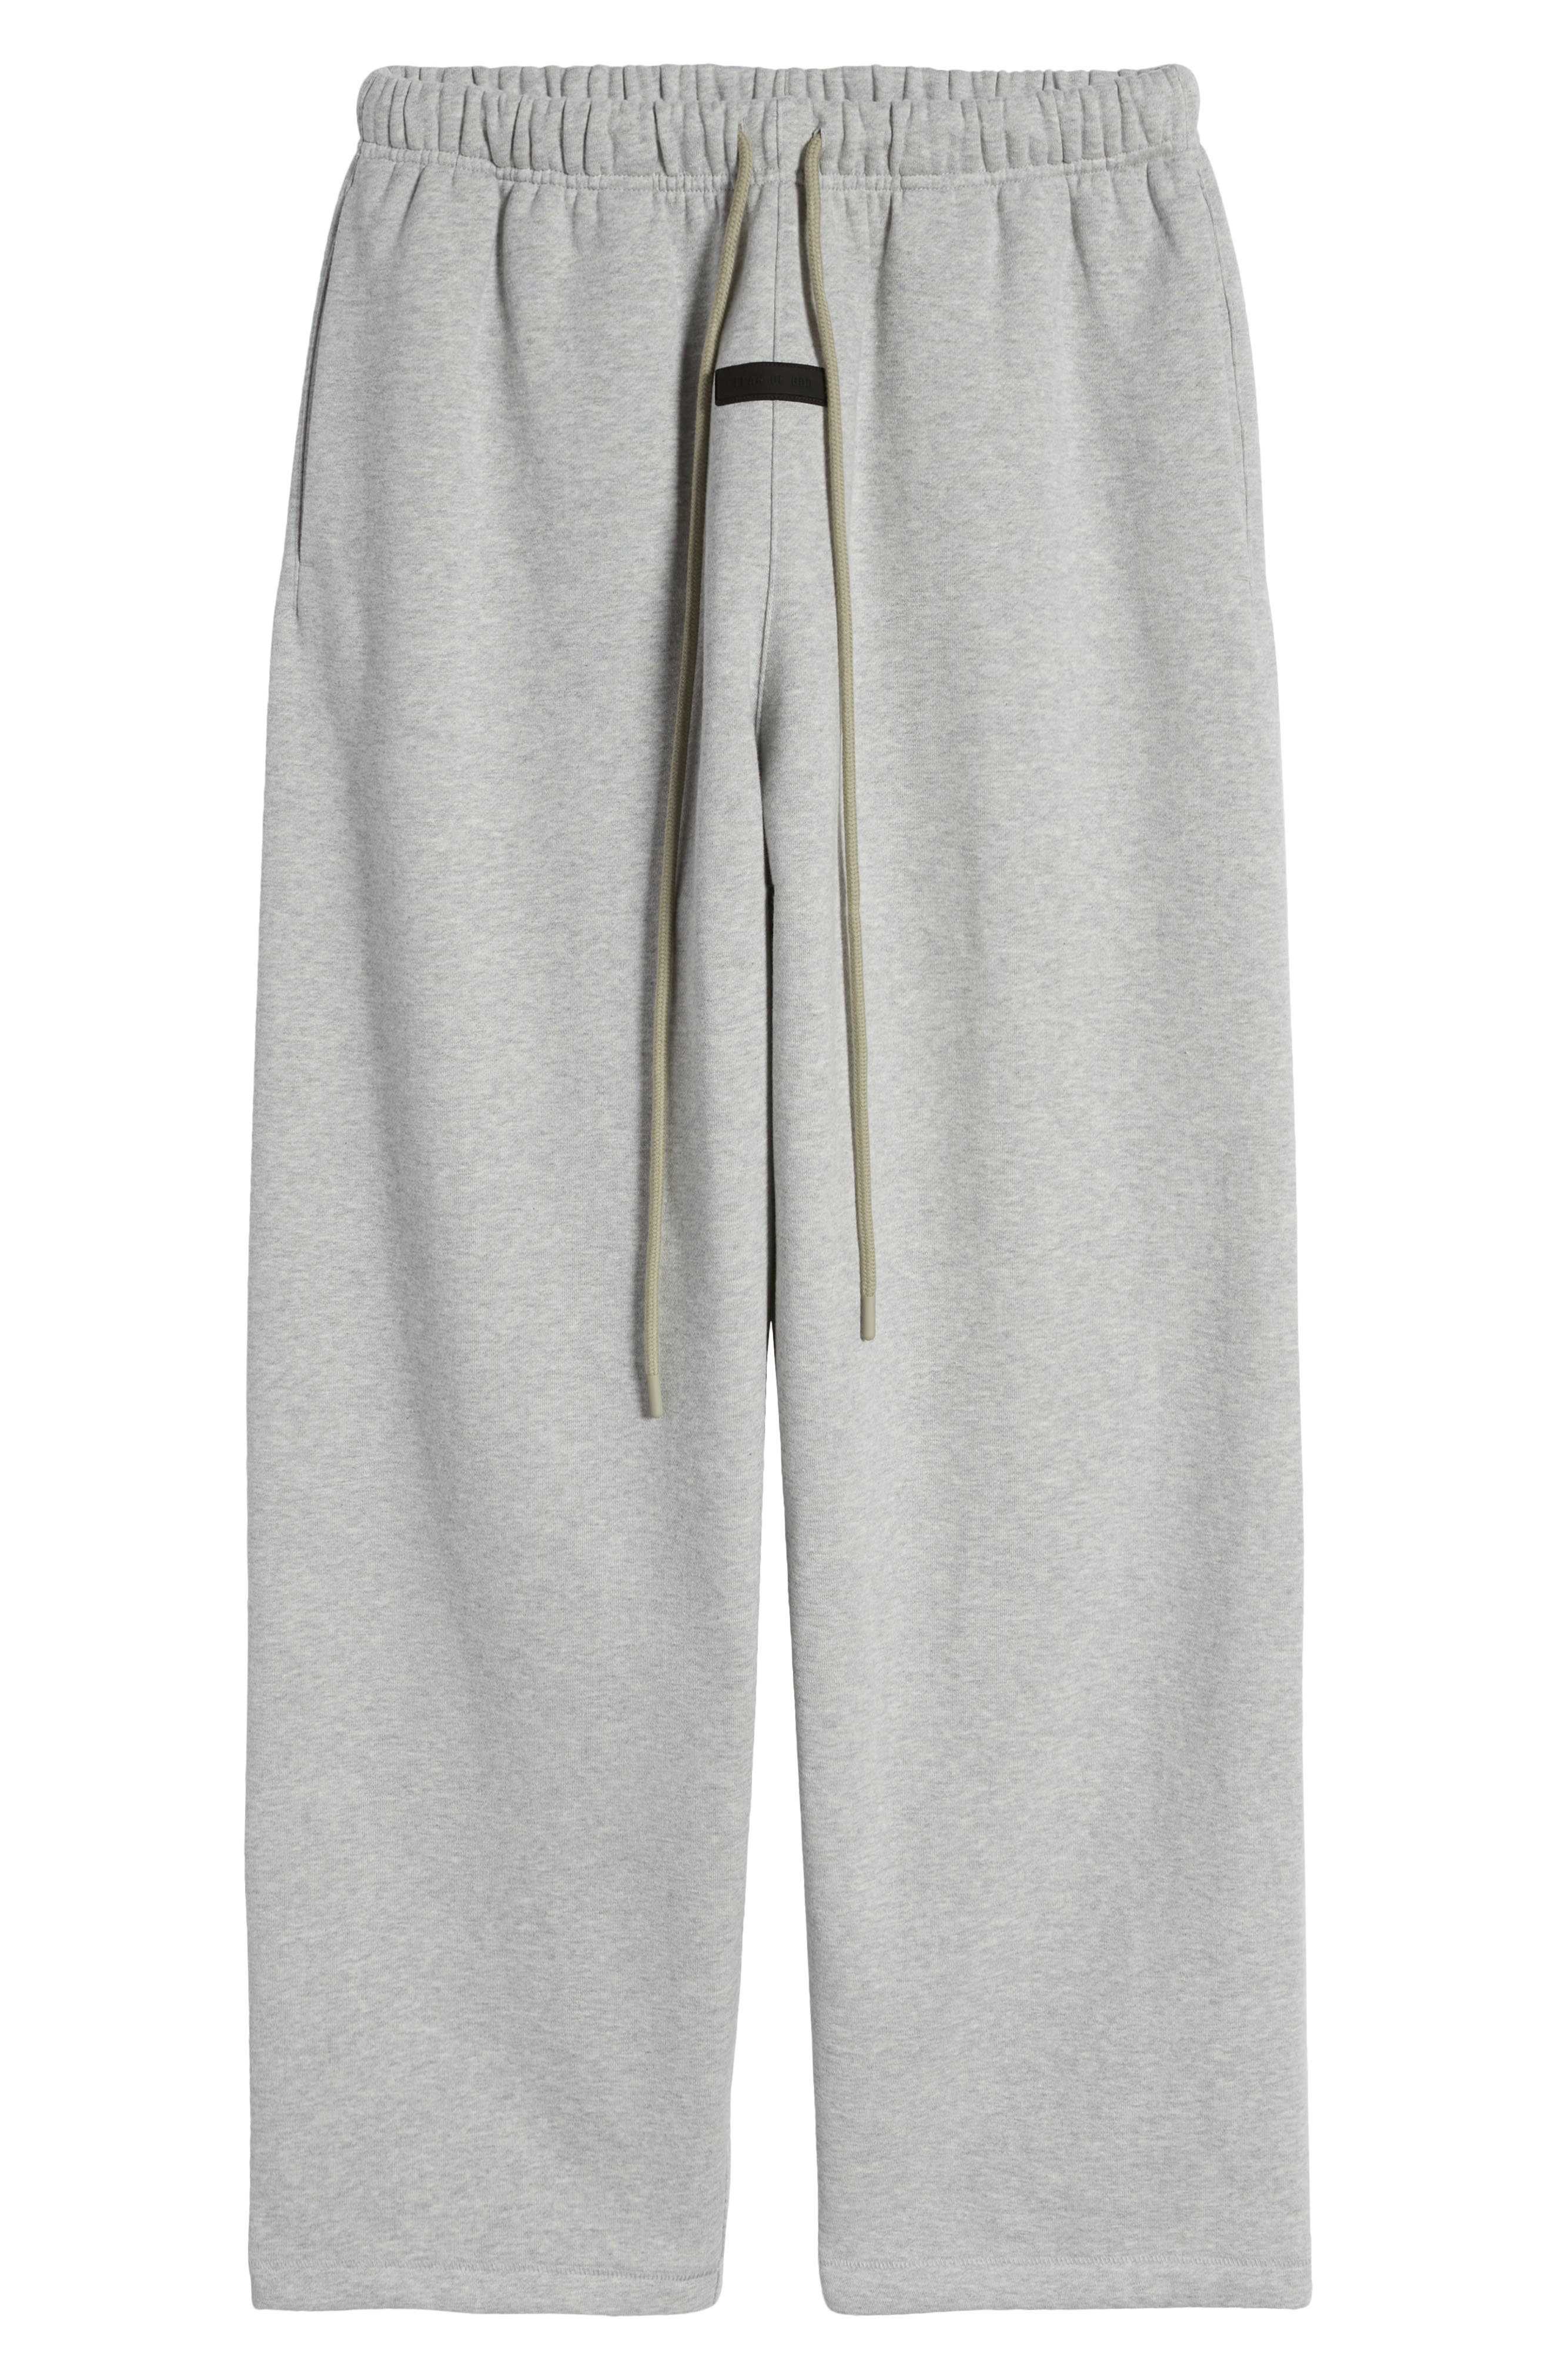 Fear of God Essentials Lounge Pant Grey Flannel